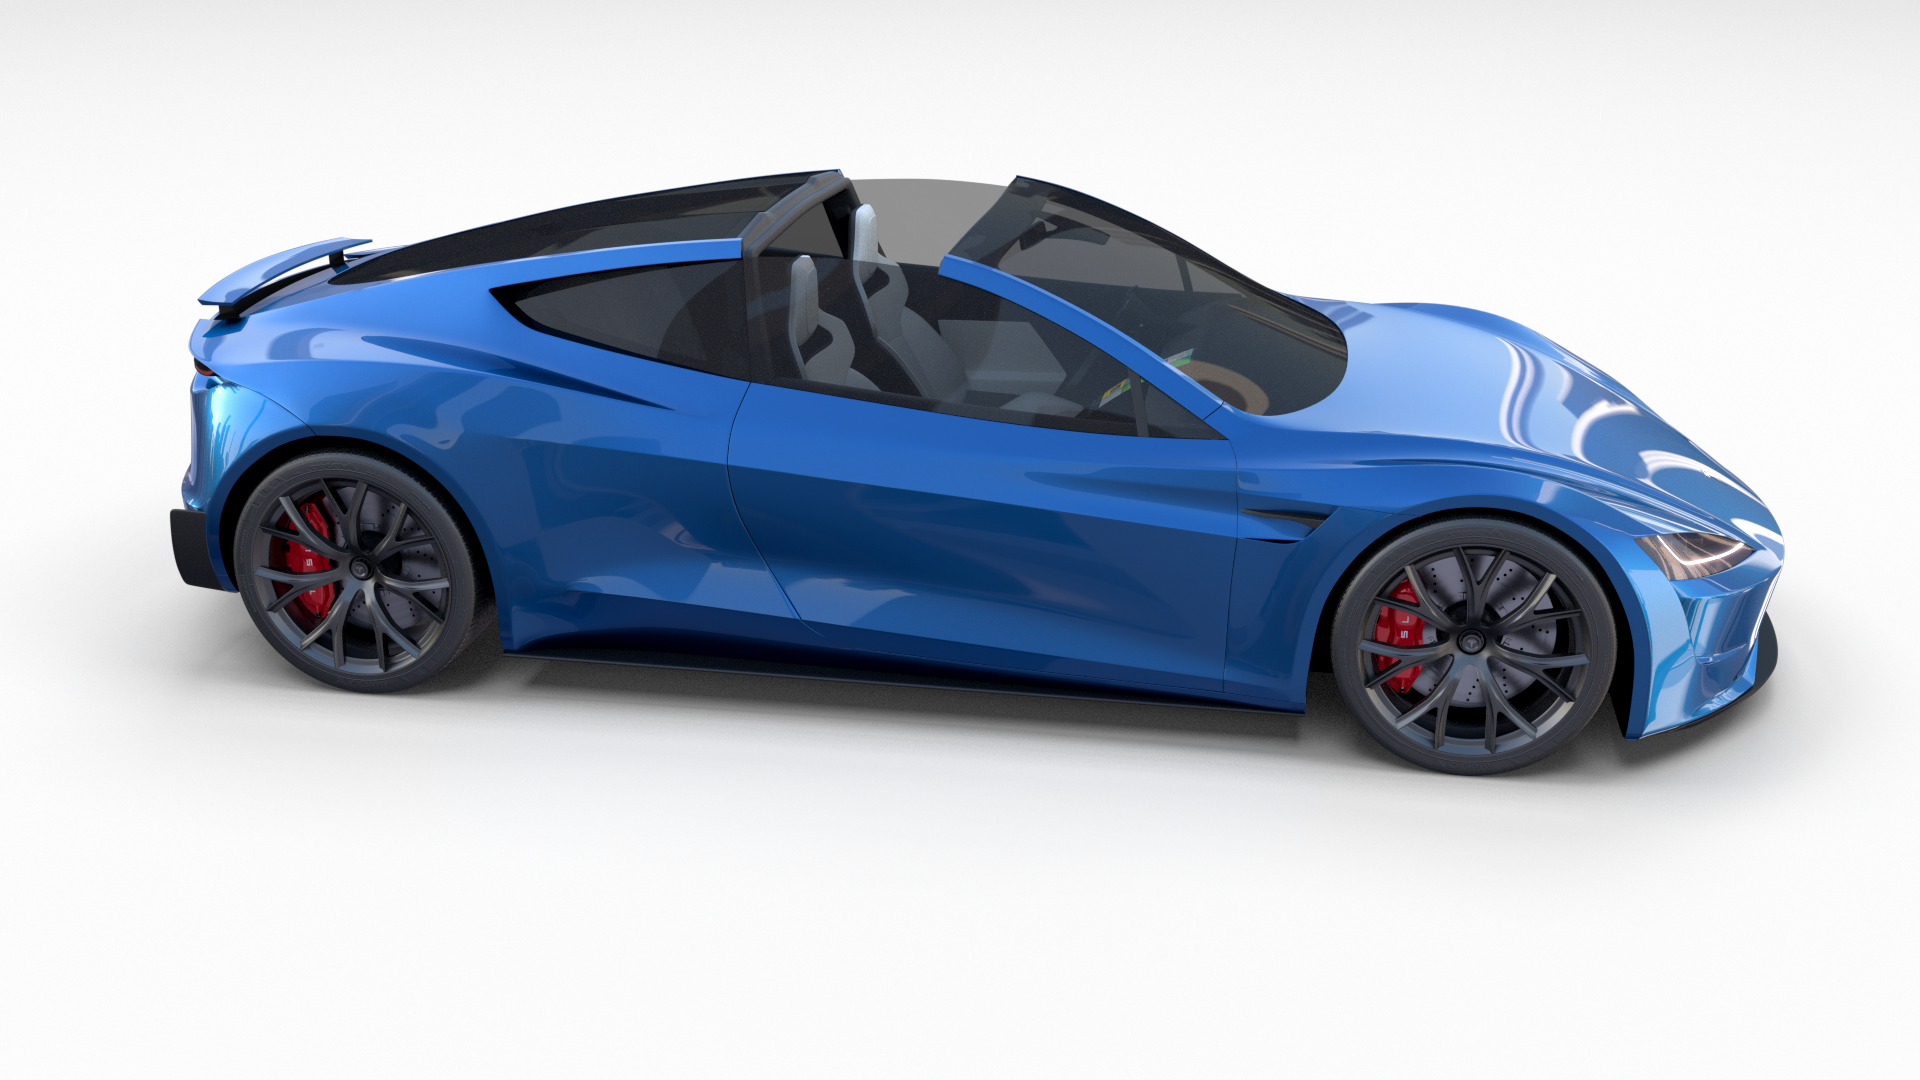 Tesla Roadster 2020 Electric Blue with interior and chassis. Tesla roadster, Roadsters, Electric blue